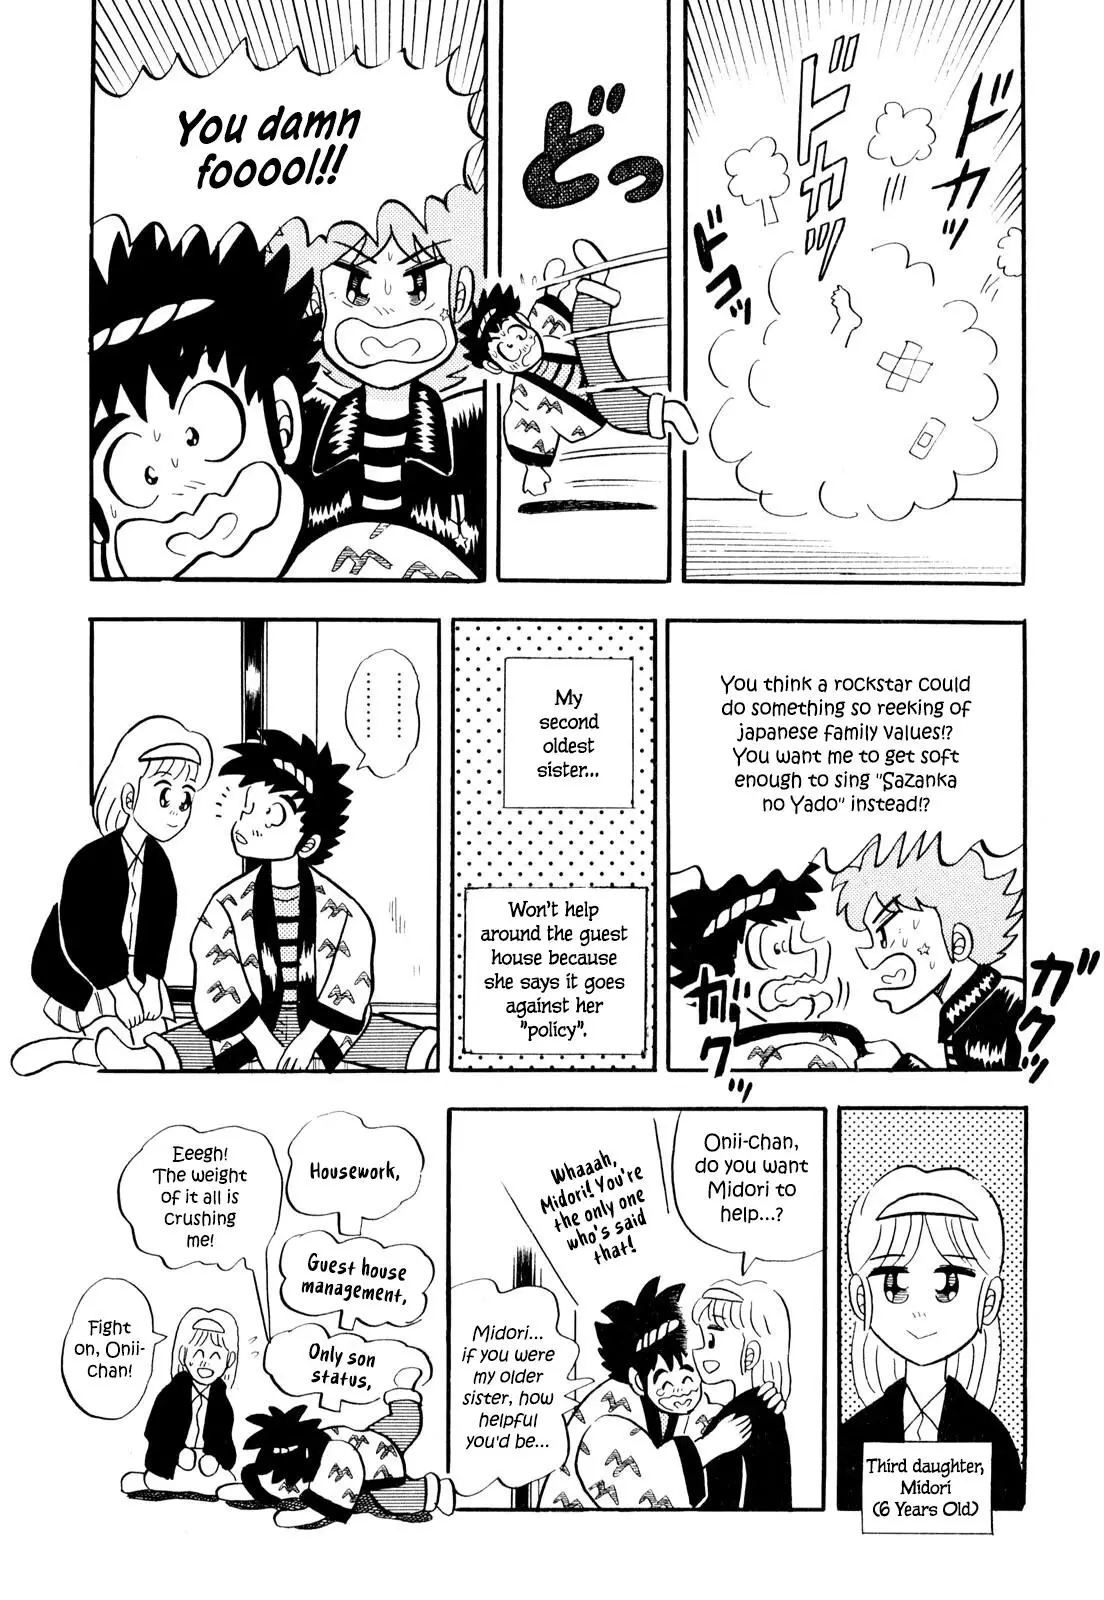 Welcome To Harukaze - A Mahjong Guesthouse Story - 1 page 7-9975ea4d